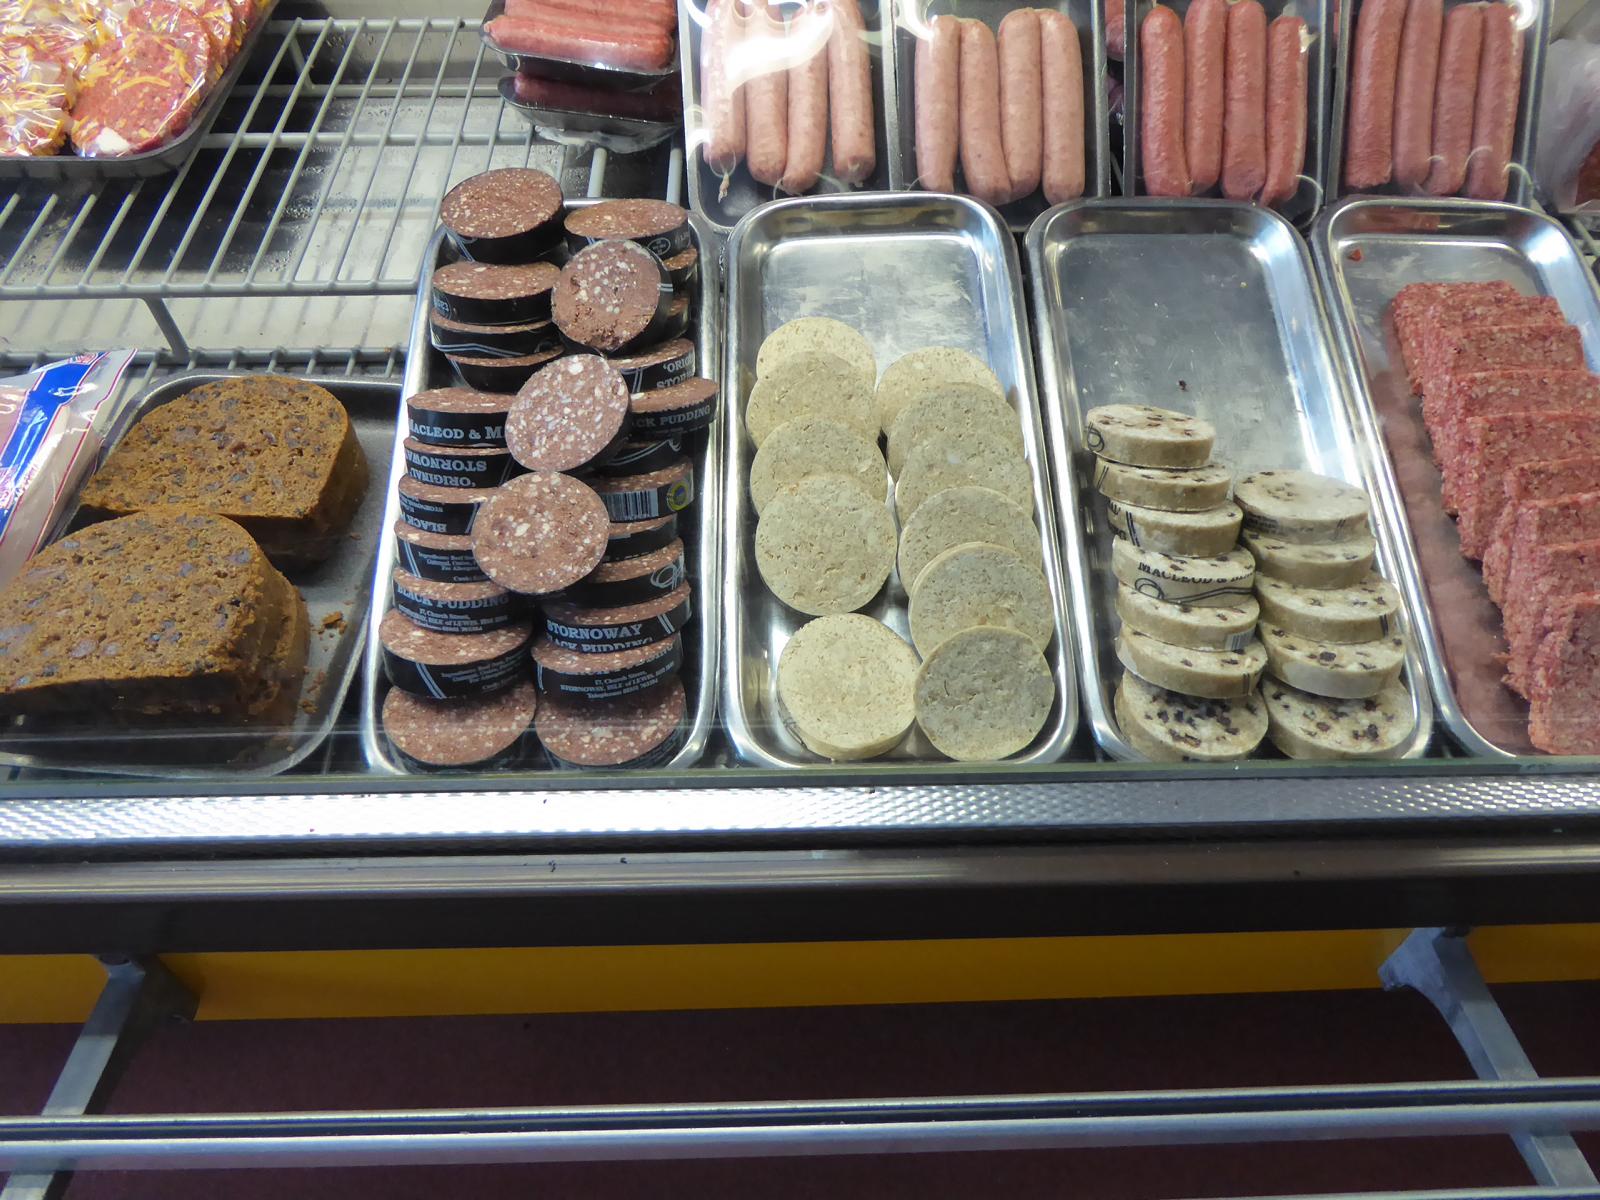 Black pudding, white pudding - in Scotland you get to buy pudding at the butcher.